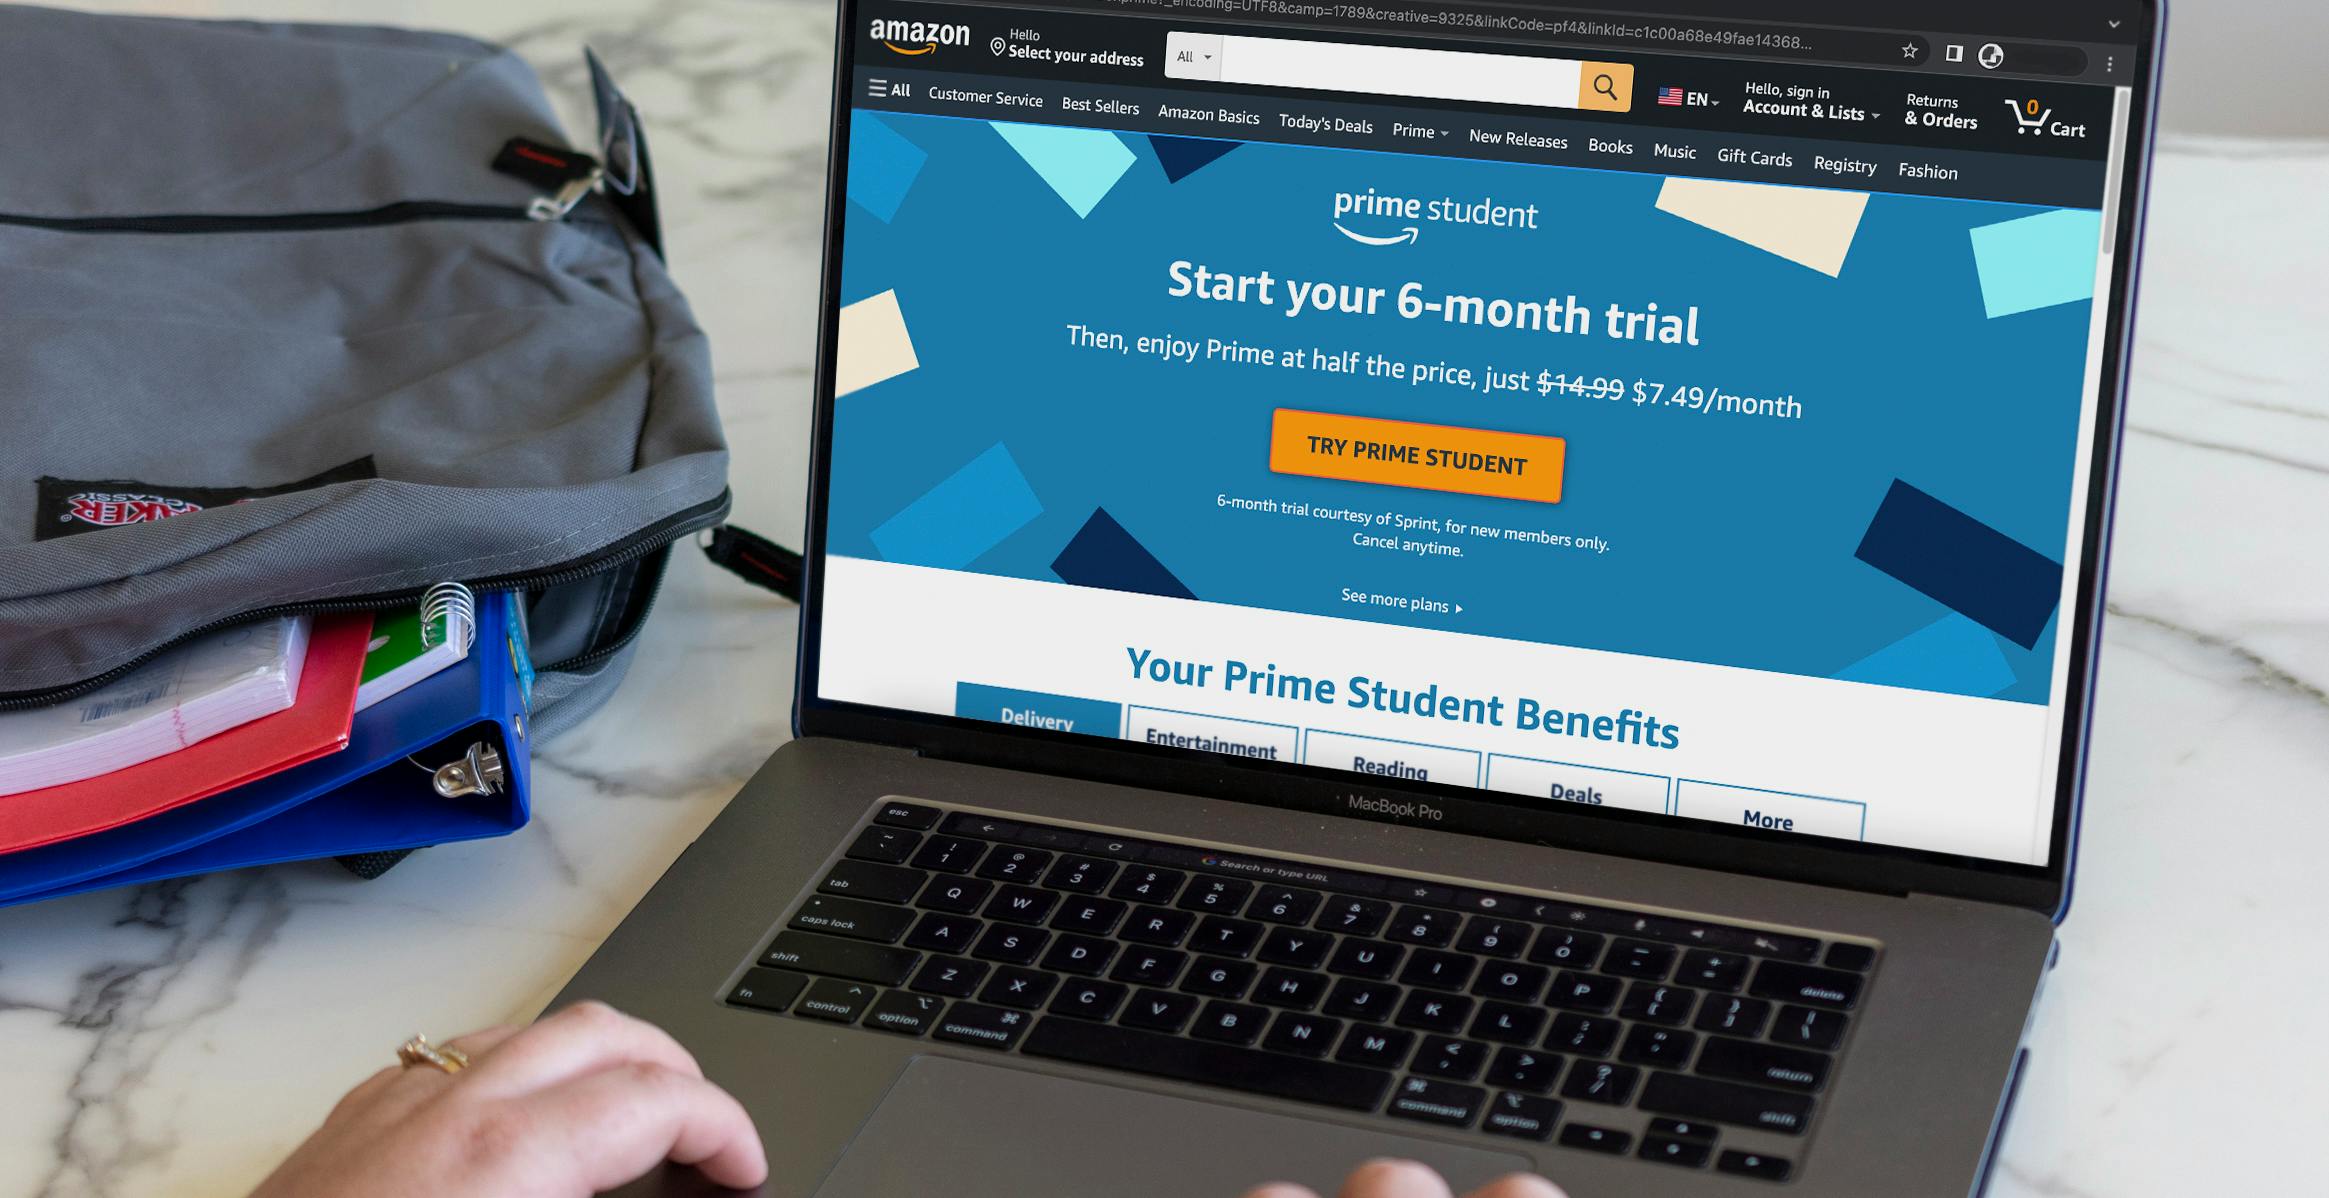 How to Get Amazon Prime Student Free for 6 Months (a $90 Value!)